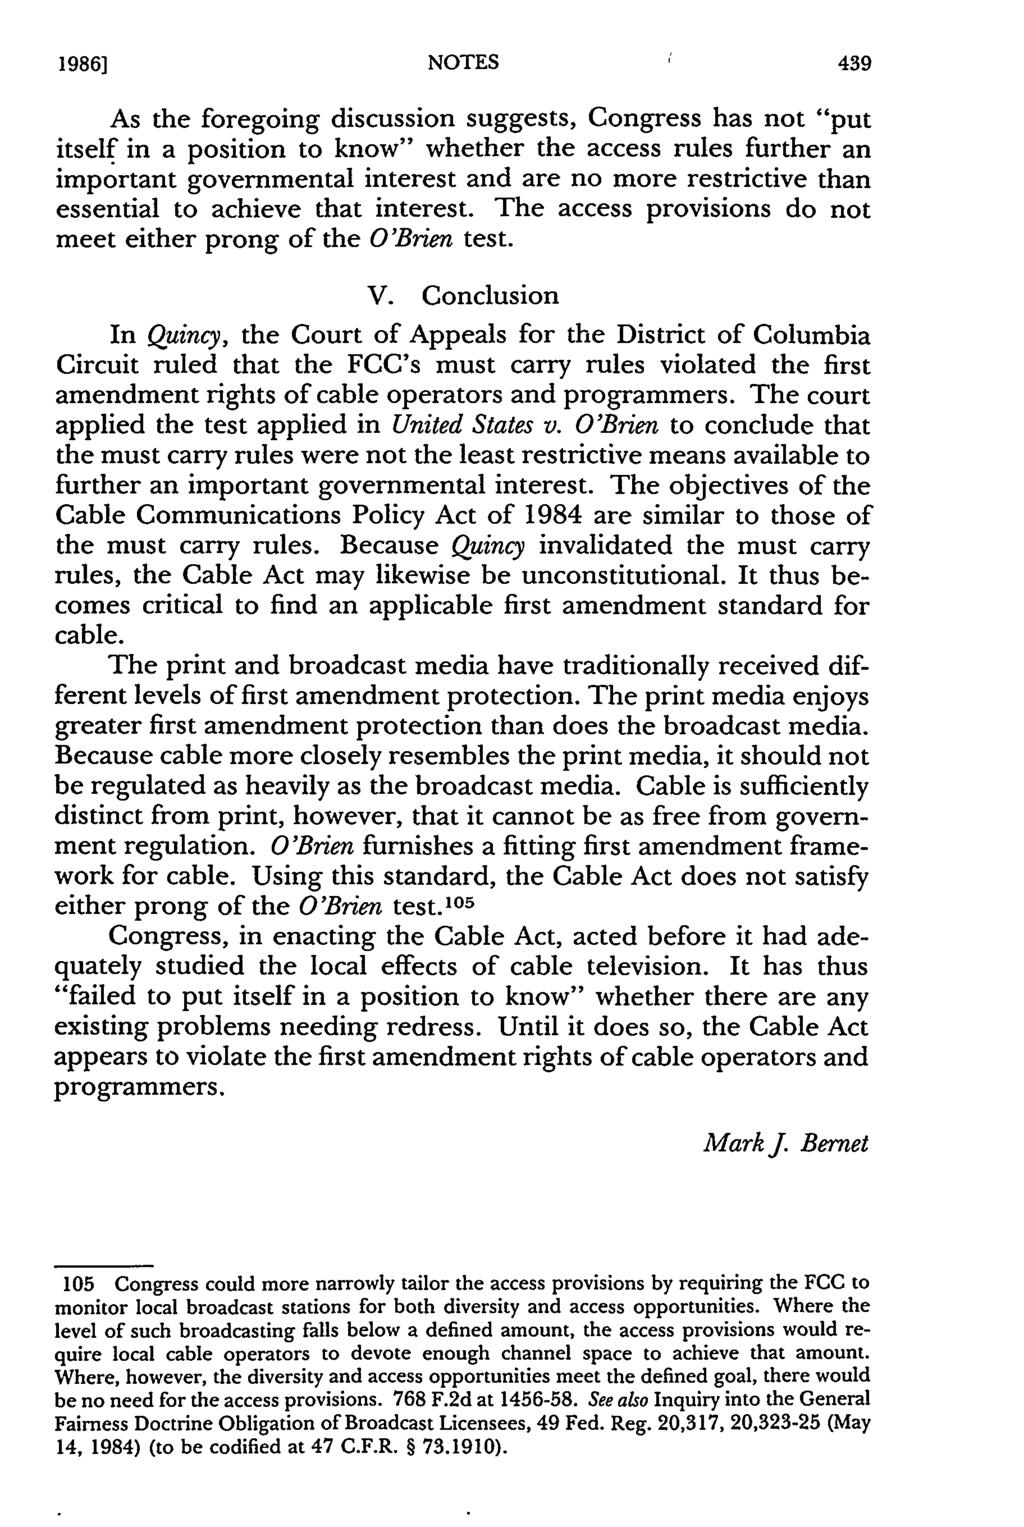 1986] NOTES As the foregoing discussion suggests, Congress has not "put itself in a position to know" whether the access rules further an important governmental interest and are no more restrictive